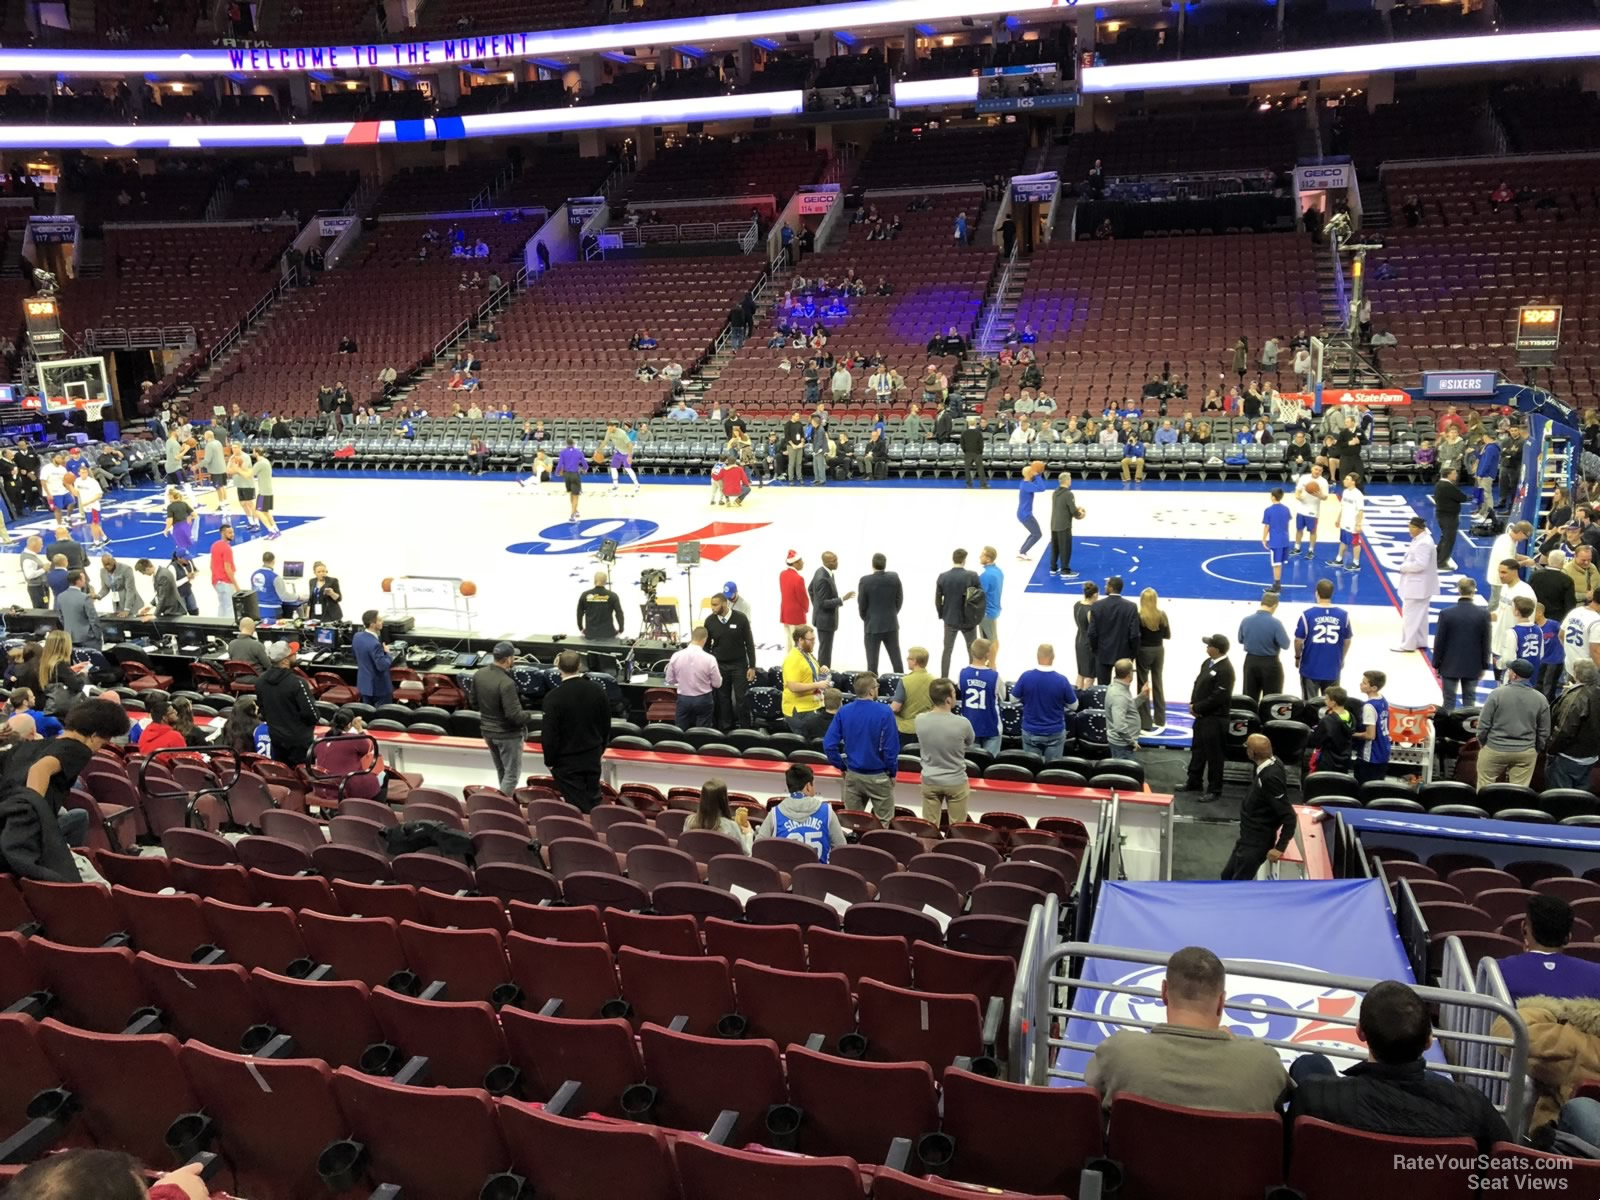 section 102, row 14 seat view  for basketball - wells fargo center